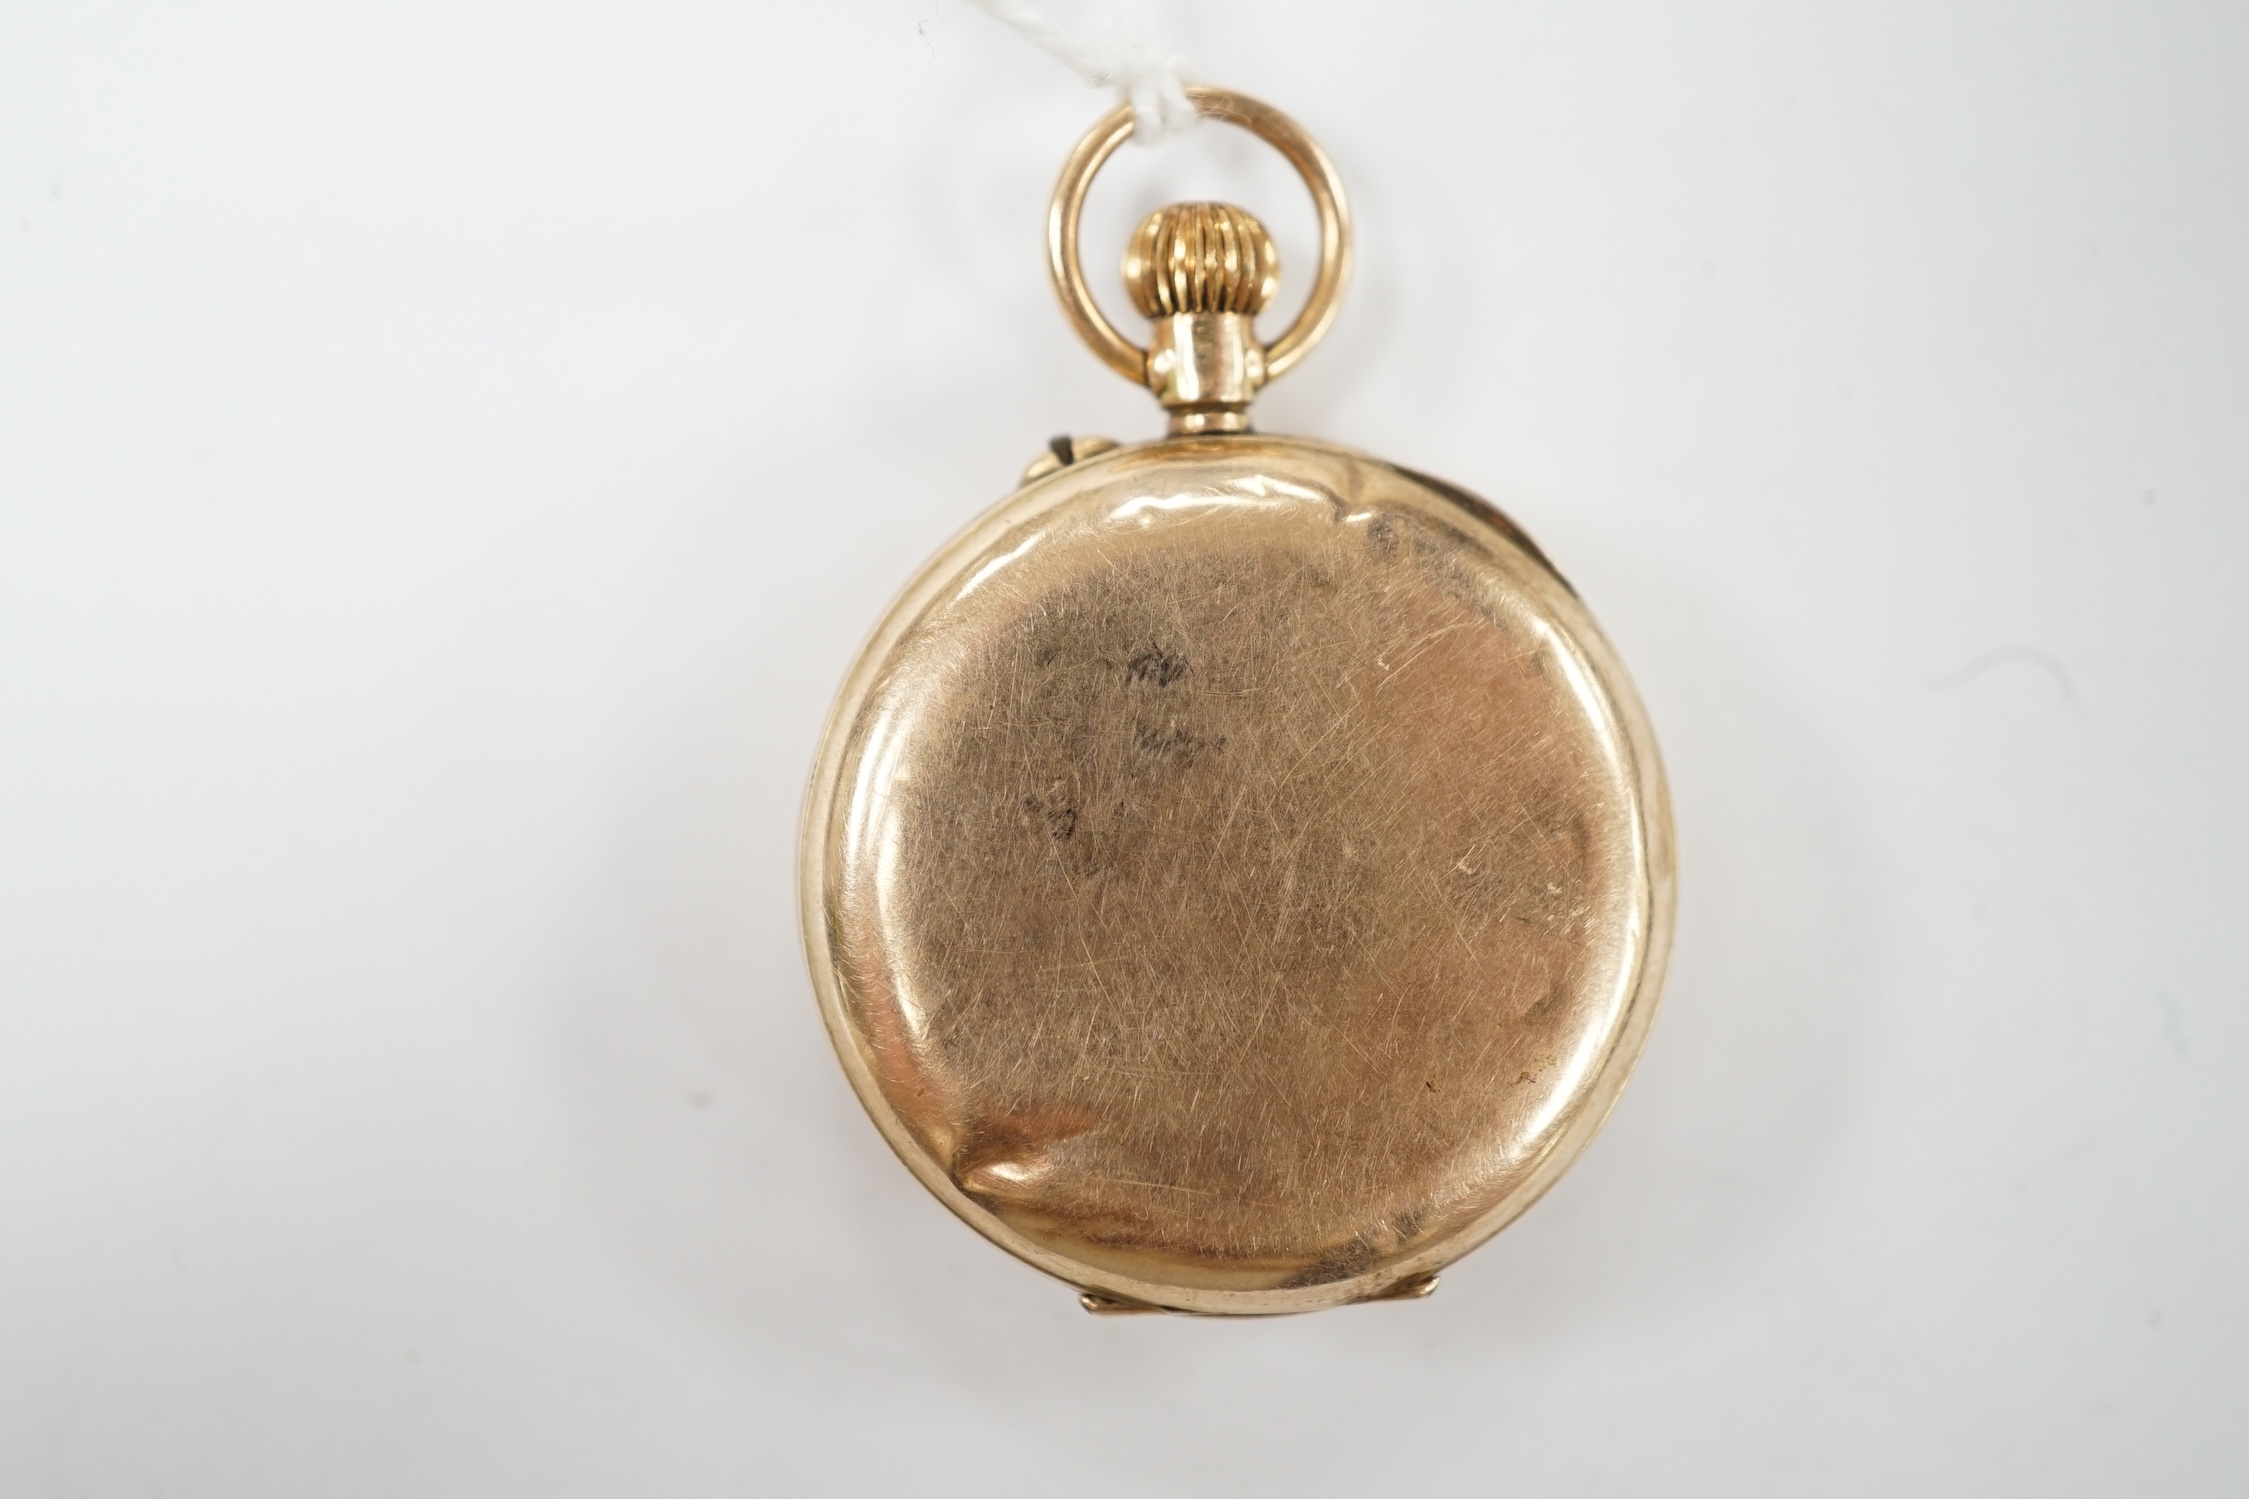 An Edwardian 12ct gold half hunter fob watch, with Arabic dial and Roman chapter ring, gross weight 20.8 grams. Condition - poor